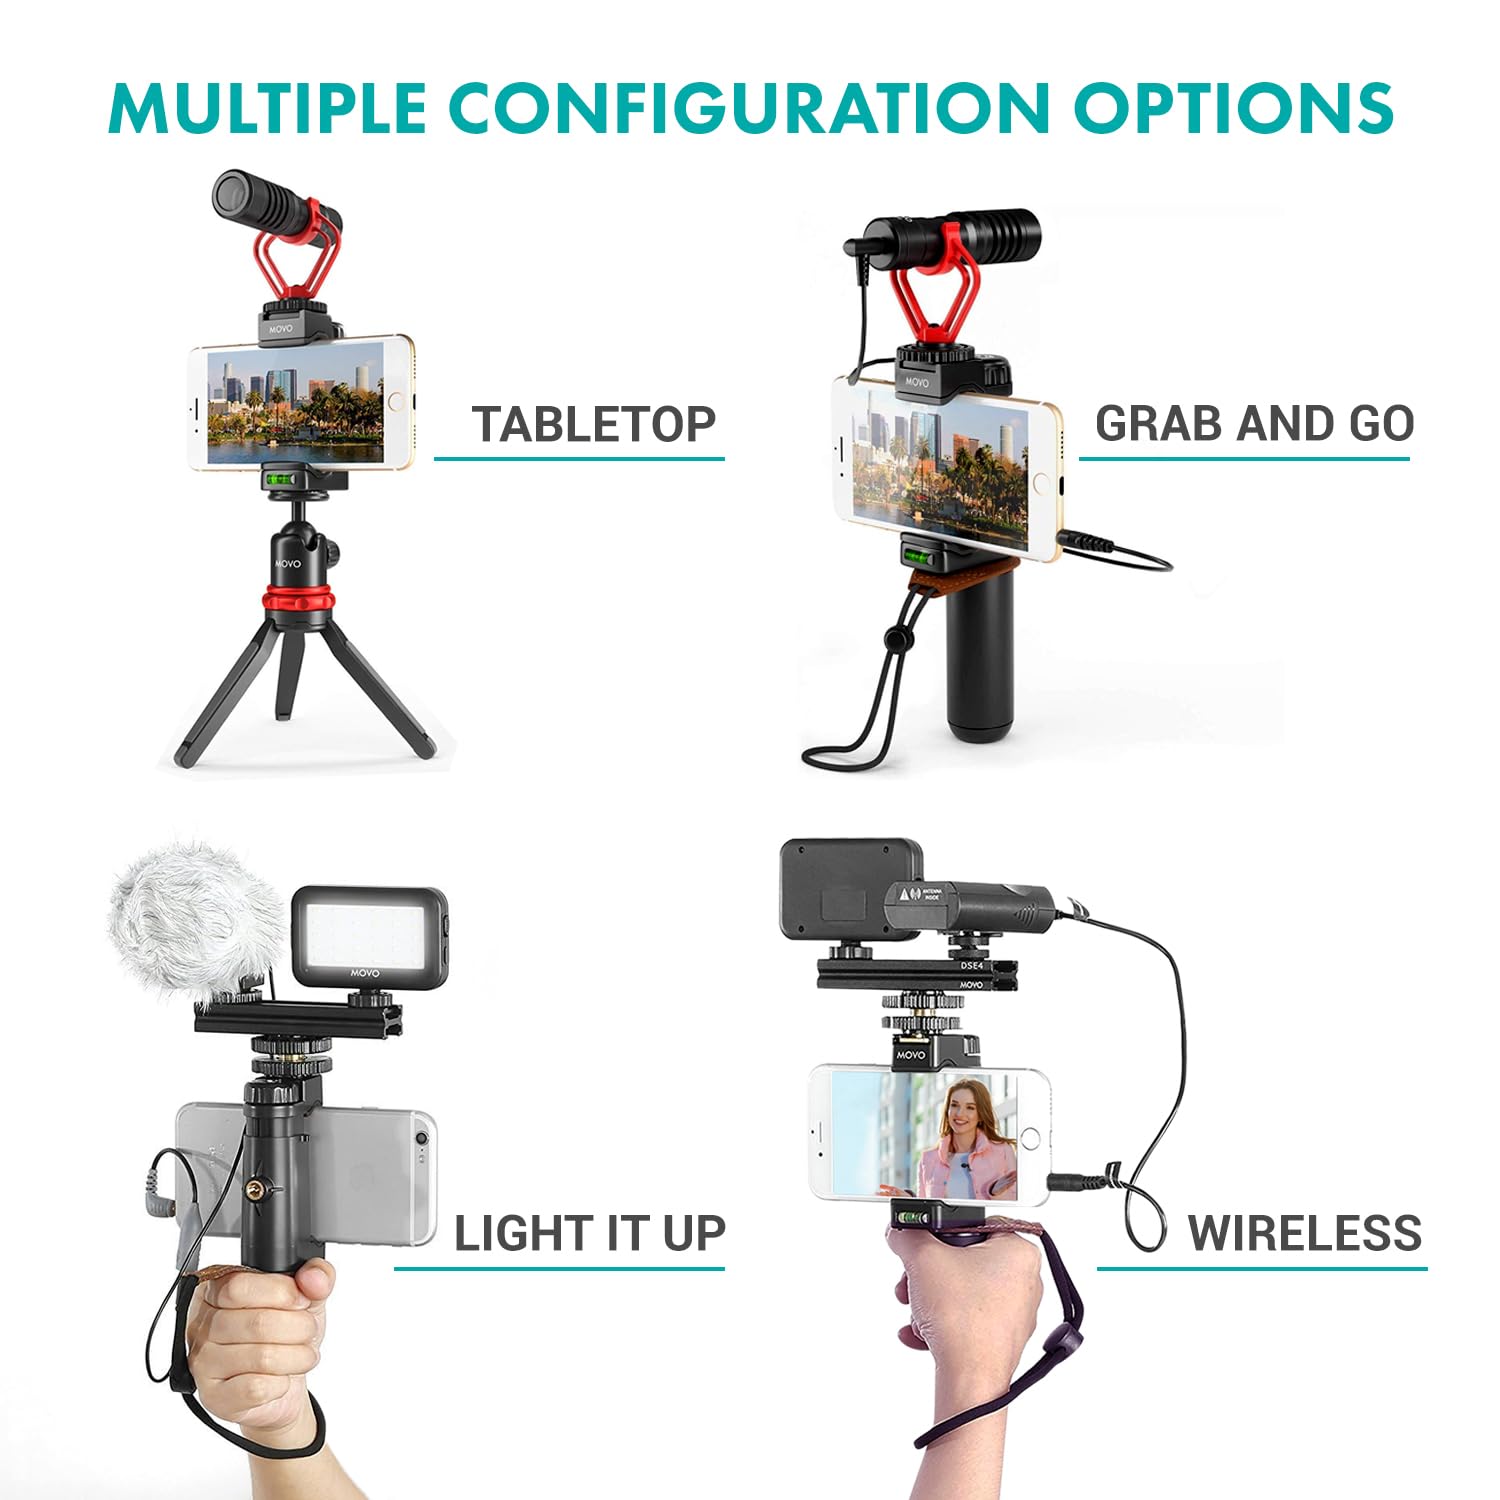 Movo V8 Huge Vlogging Kit for iPhone with Tripod, Grip, Microphones, LED Lights, and Wireless Remote Vlog Kit - YouTube Starter Kit for iPhone or Samsung - iPhone Vlogging Kit Equipment  - Very Good